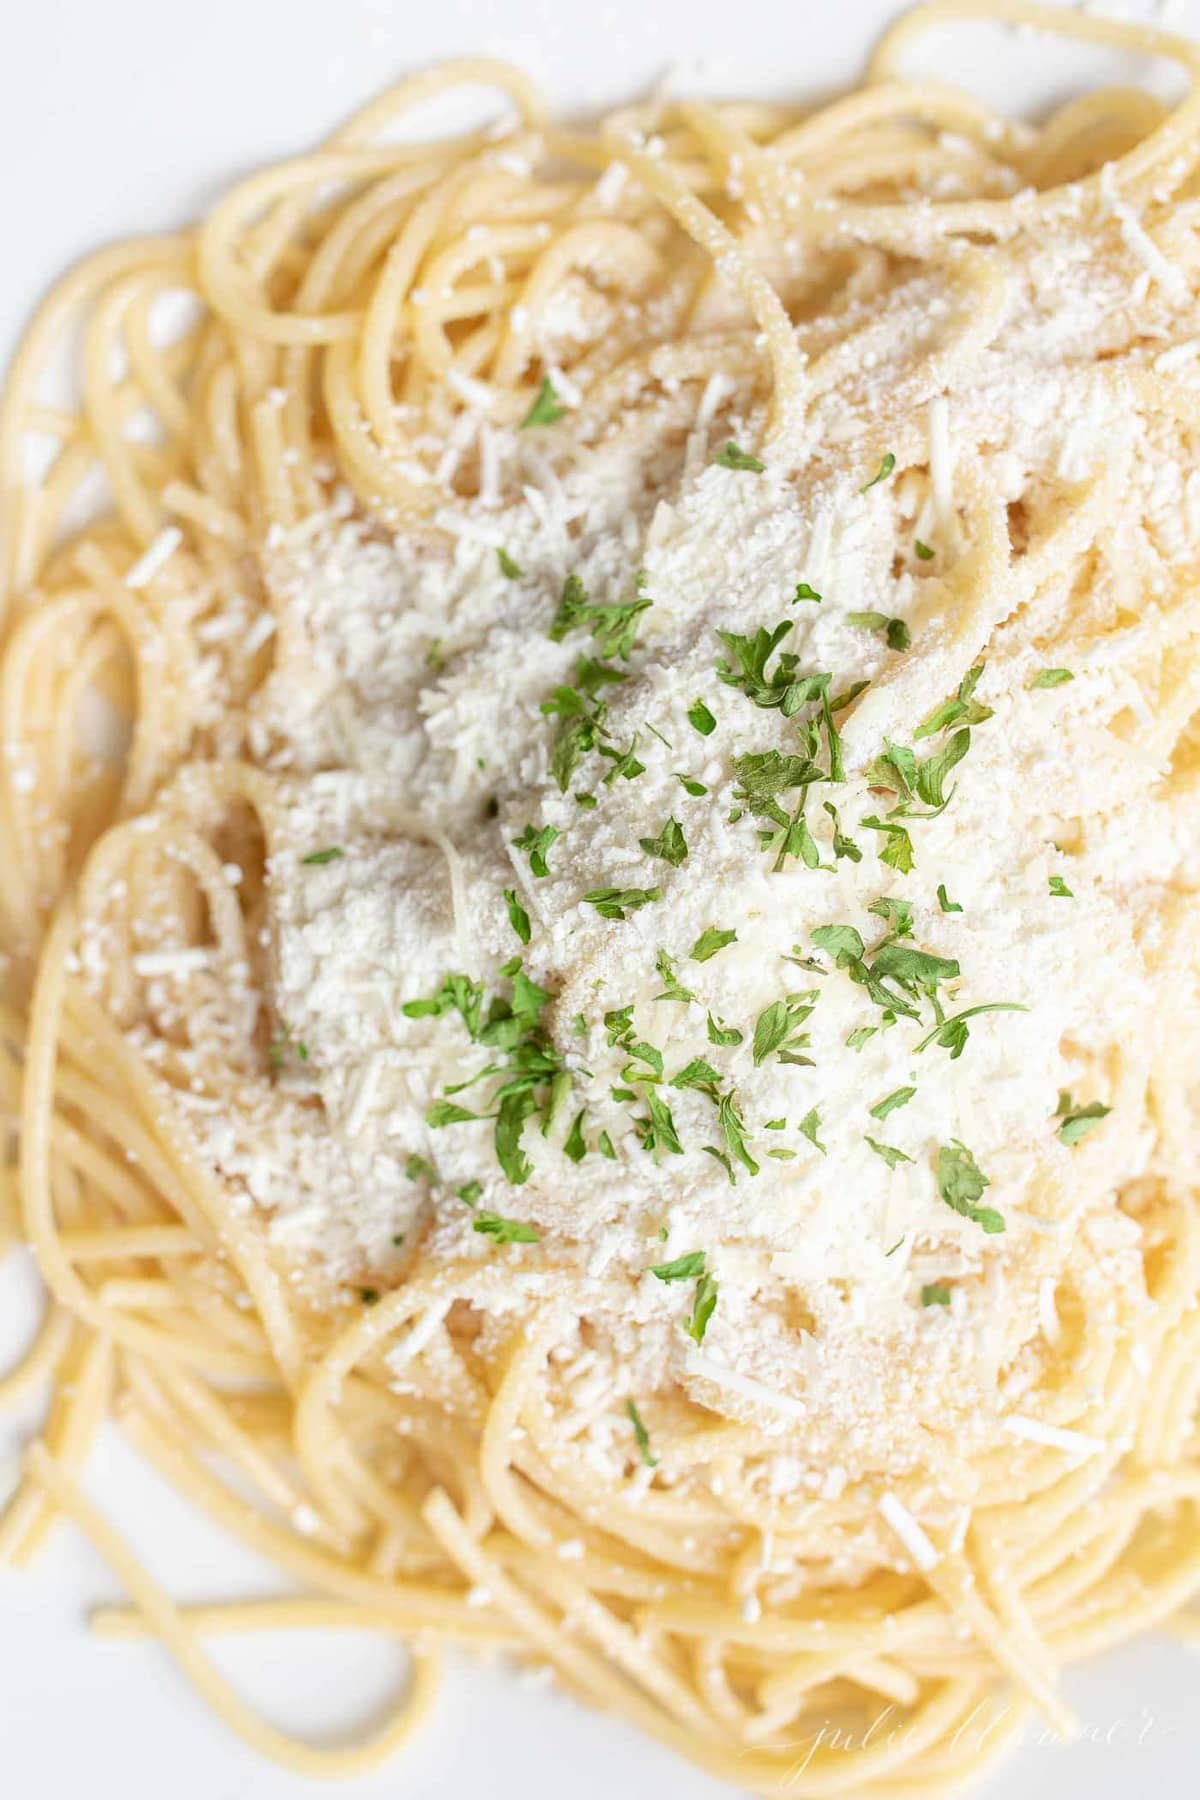 spaghetti with mizithra cheese garnished with parsley